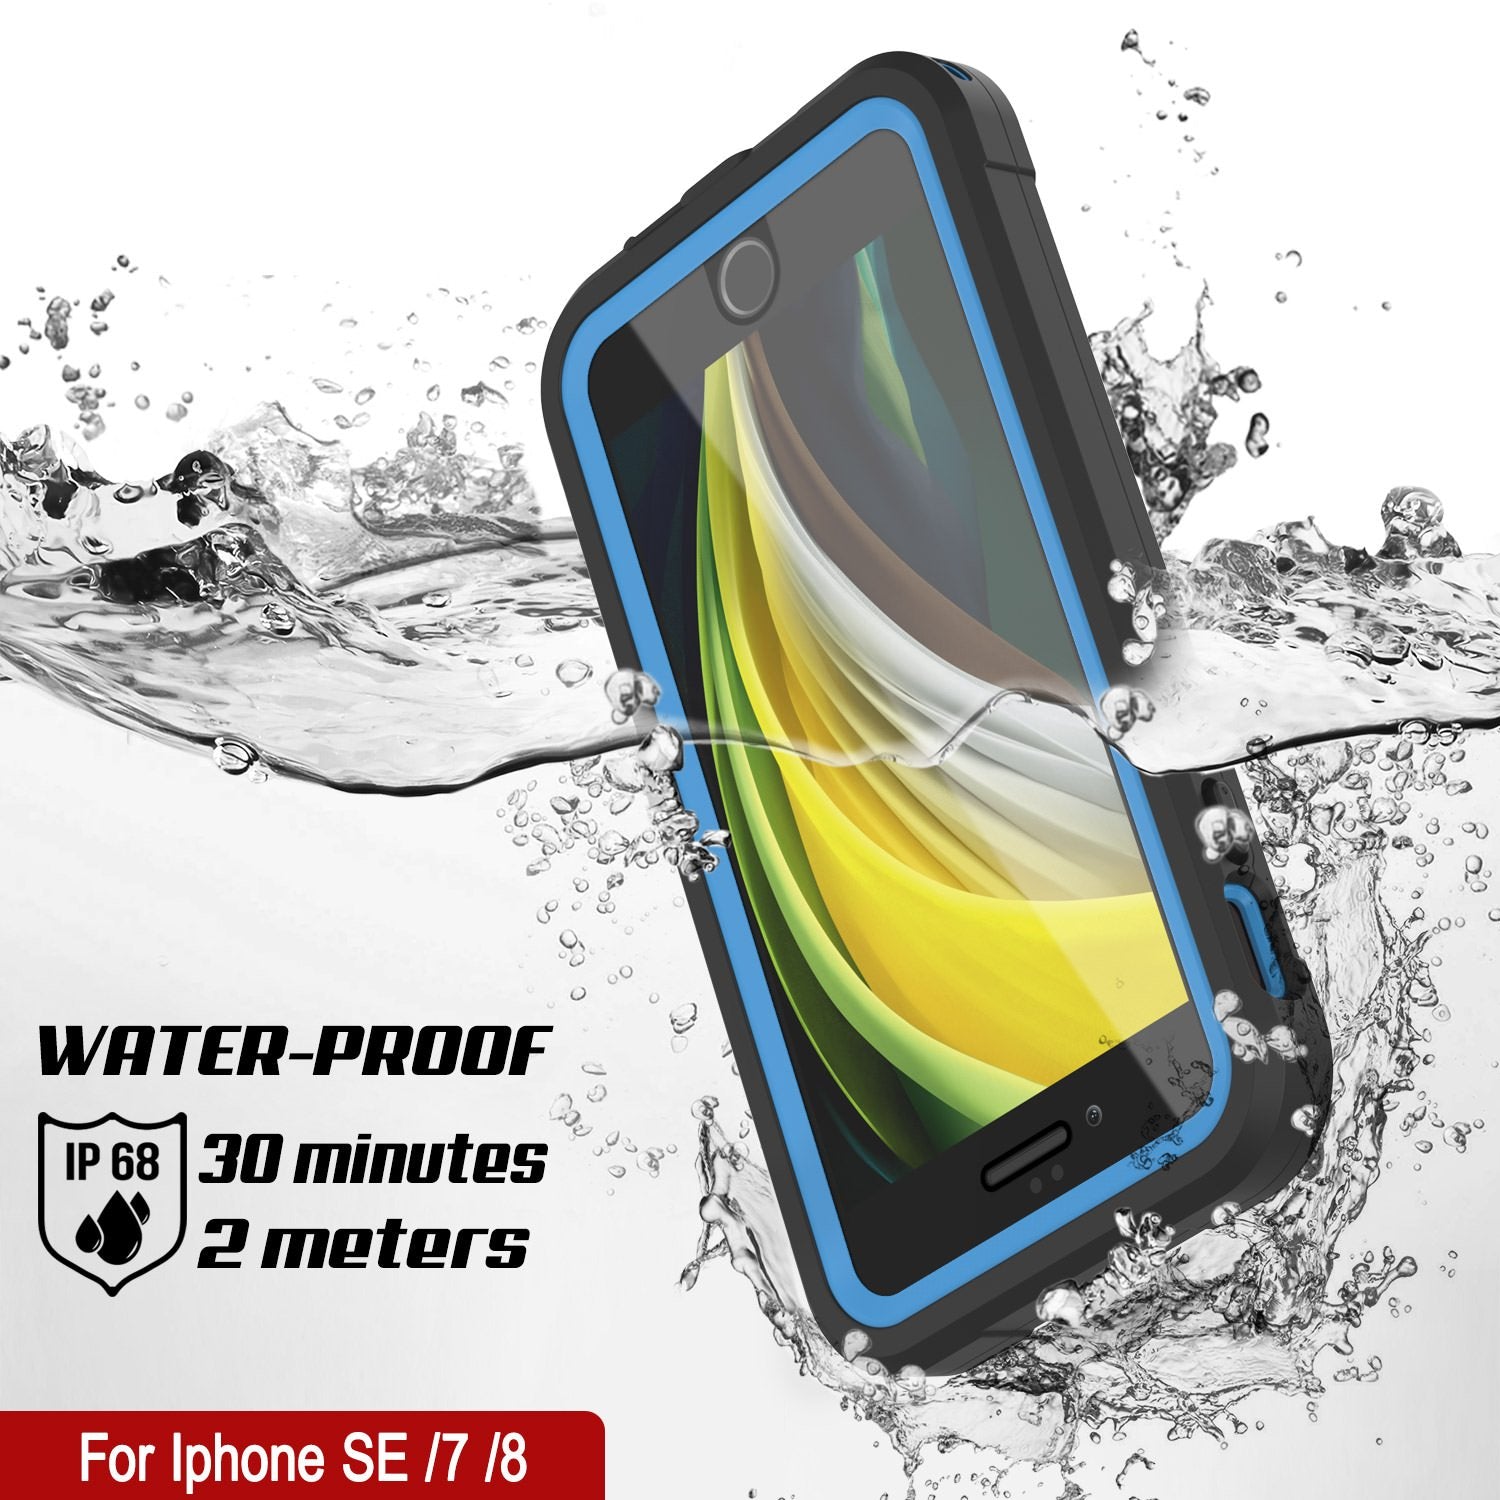 iPhone 7 Waterproof IP68 Case, Punkcase [Blue]  [Maximus Series] [Slim Fit] [IP68 Certified] [Shockresistant] Clear Armor Cover with Screen Protector | Ultimate Protection